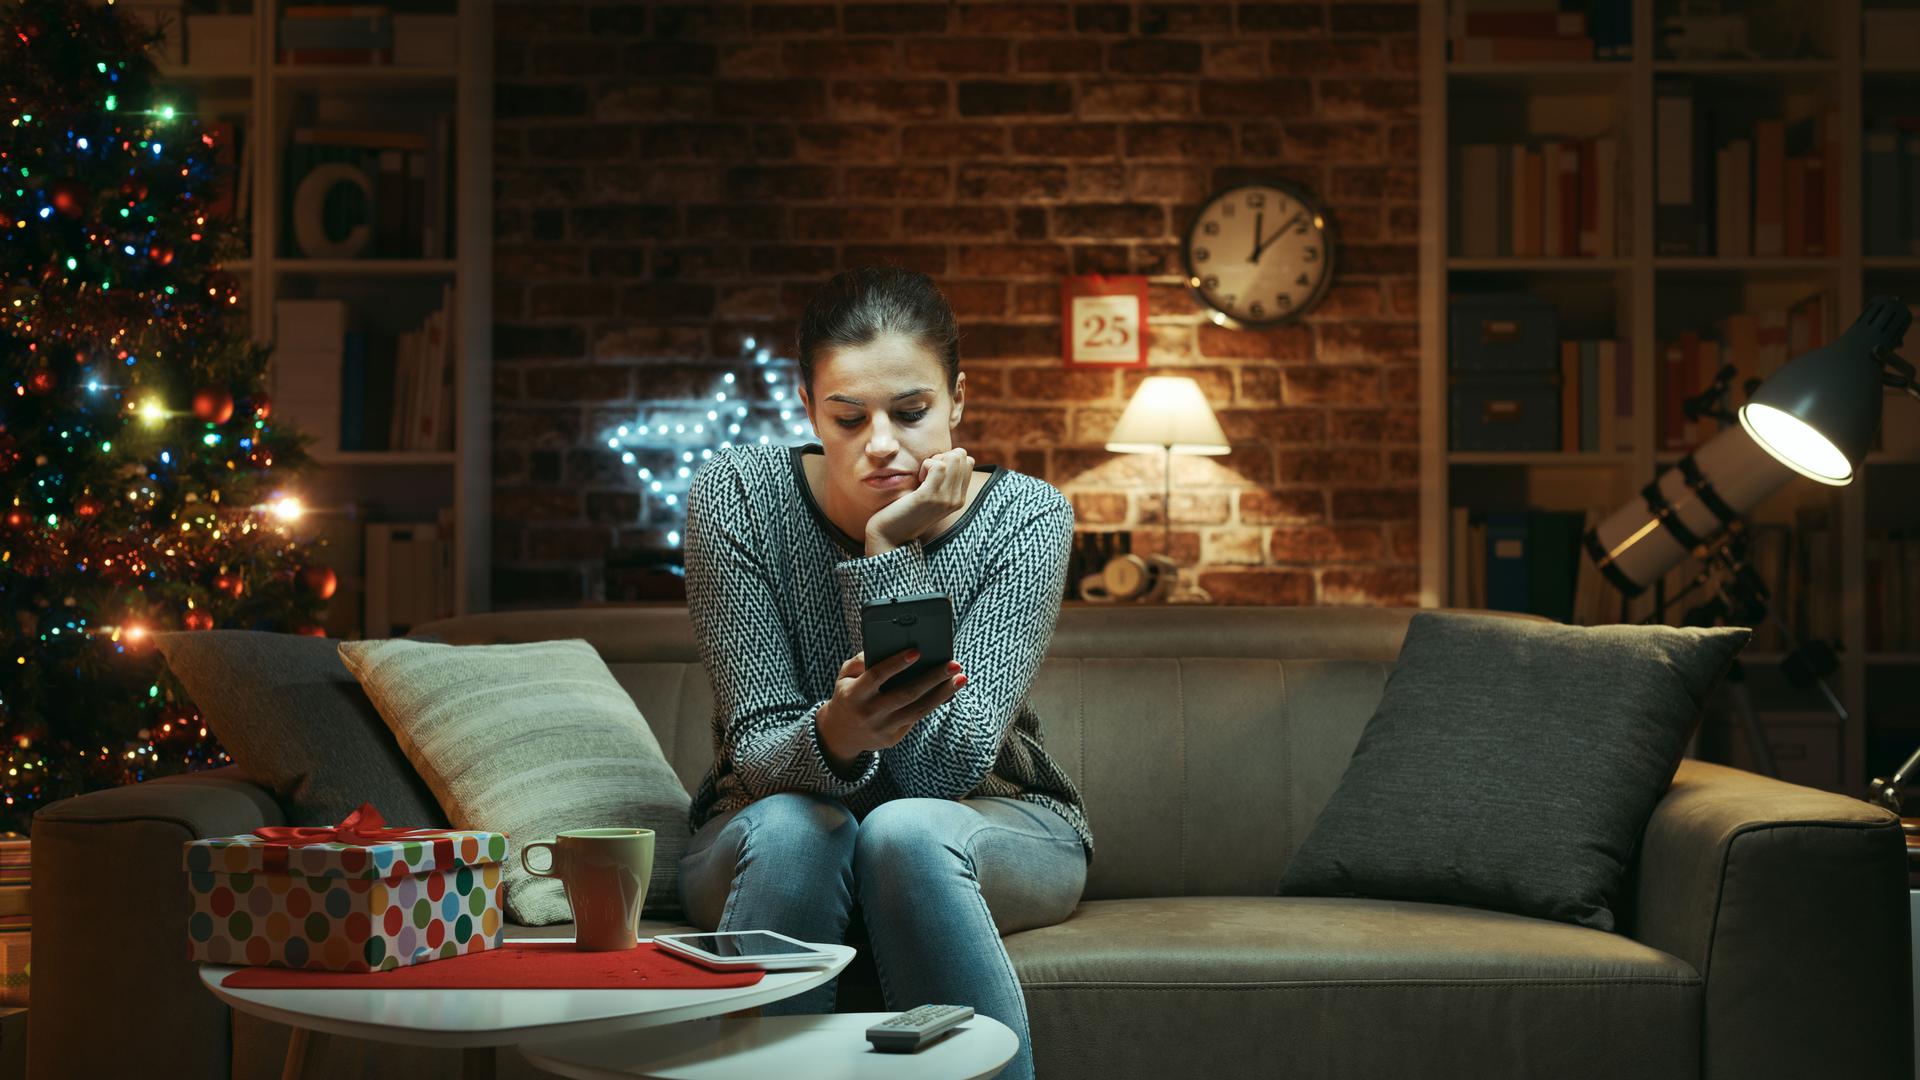 Sad woman celebrating Christmas at home alone: she is sitting on the sofa and waiting for messages on her smartphone